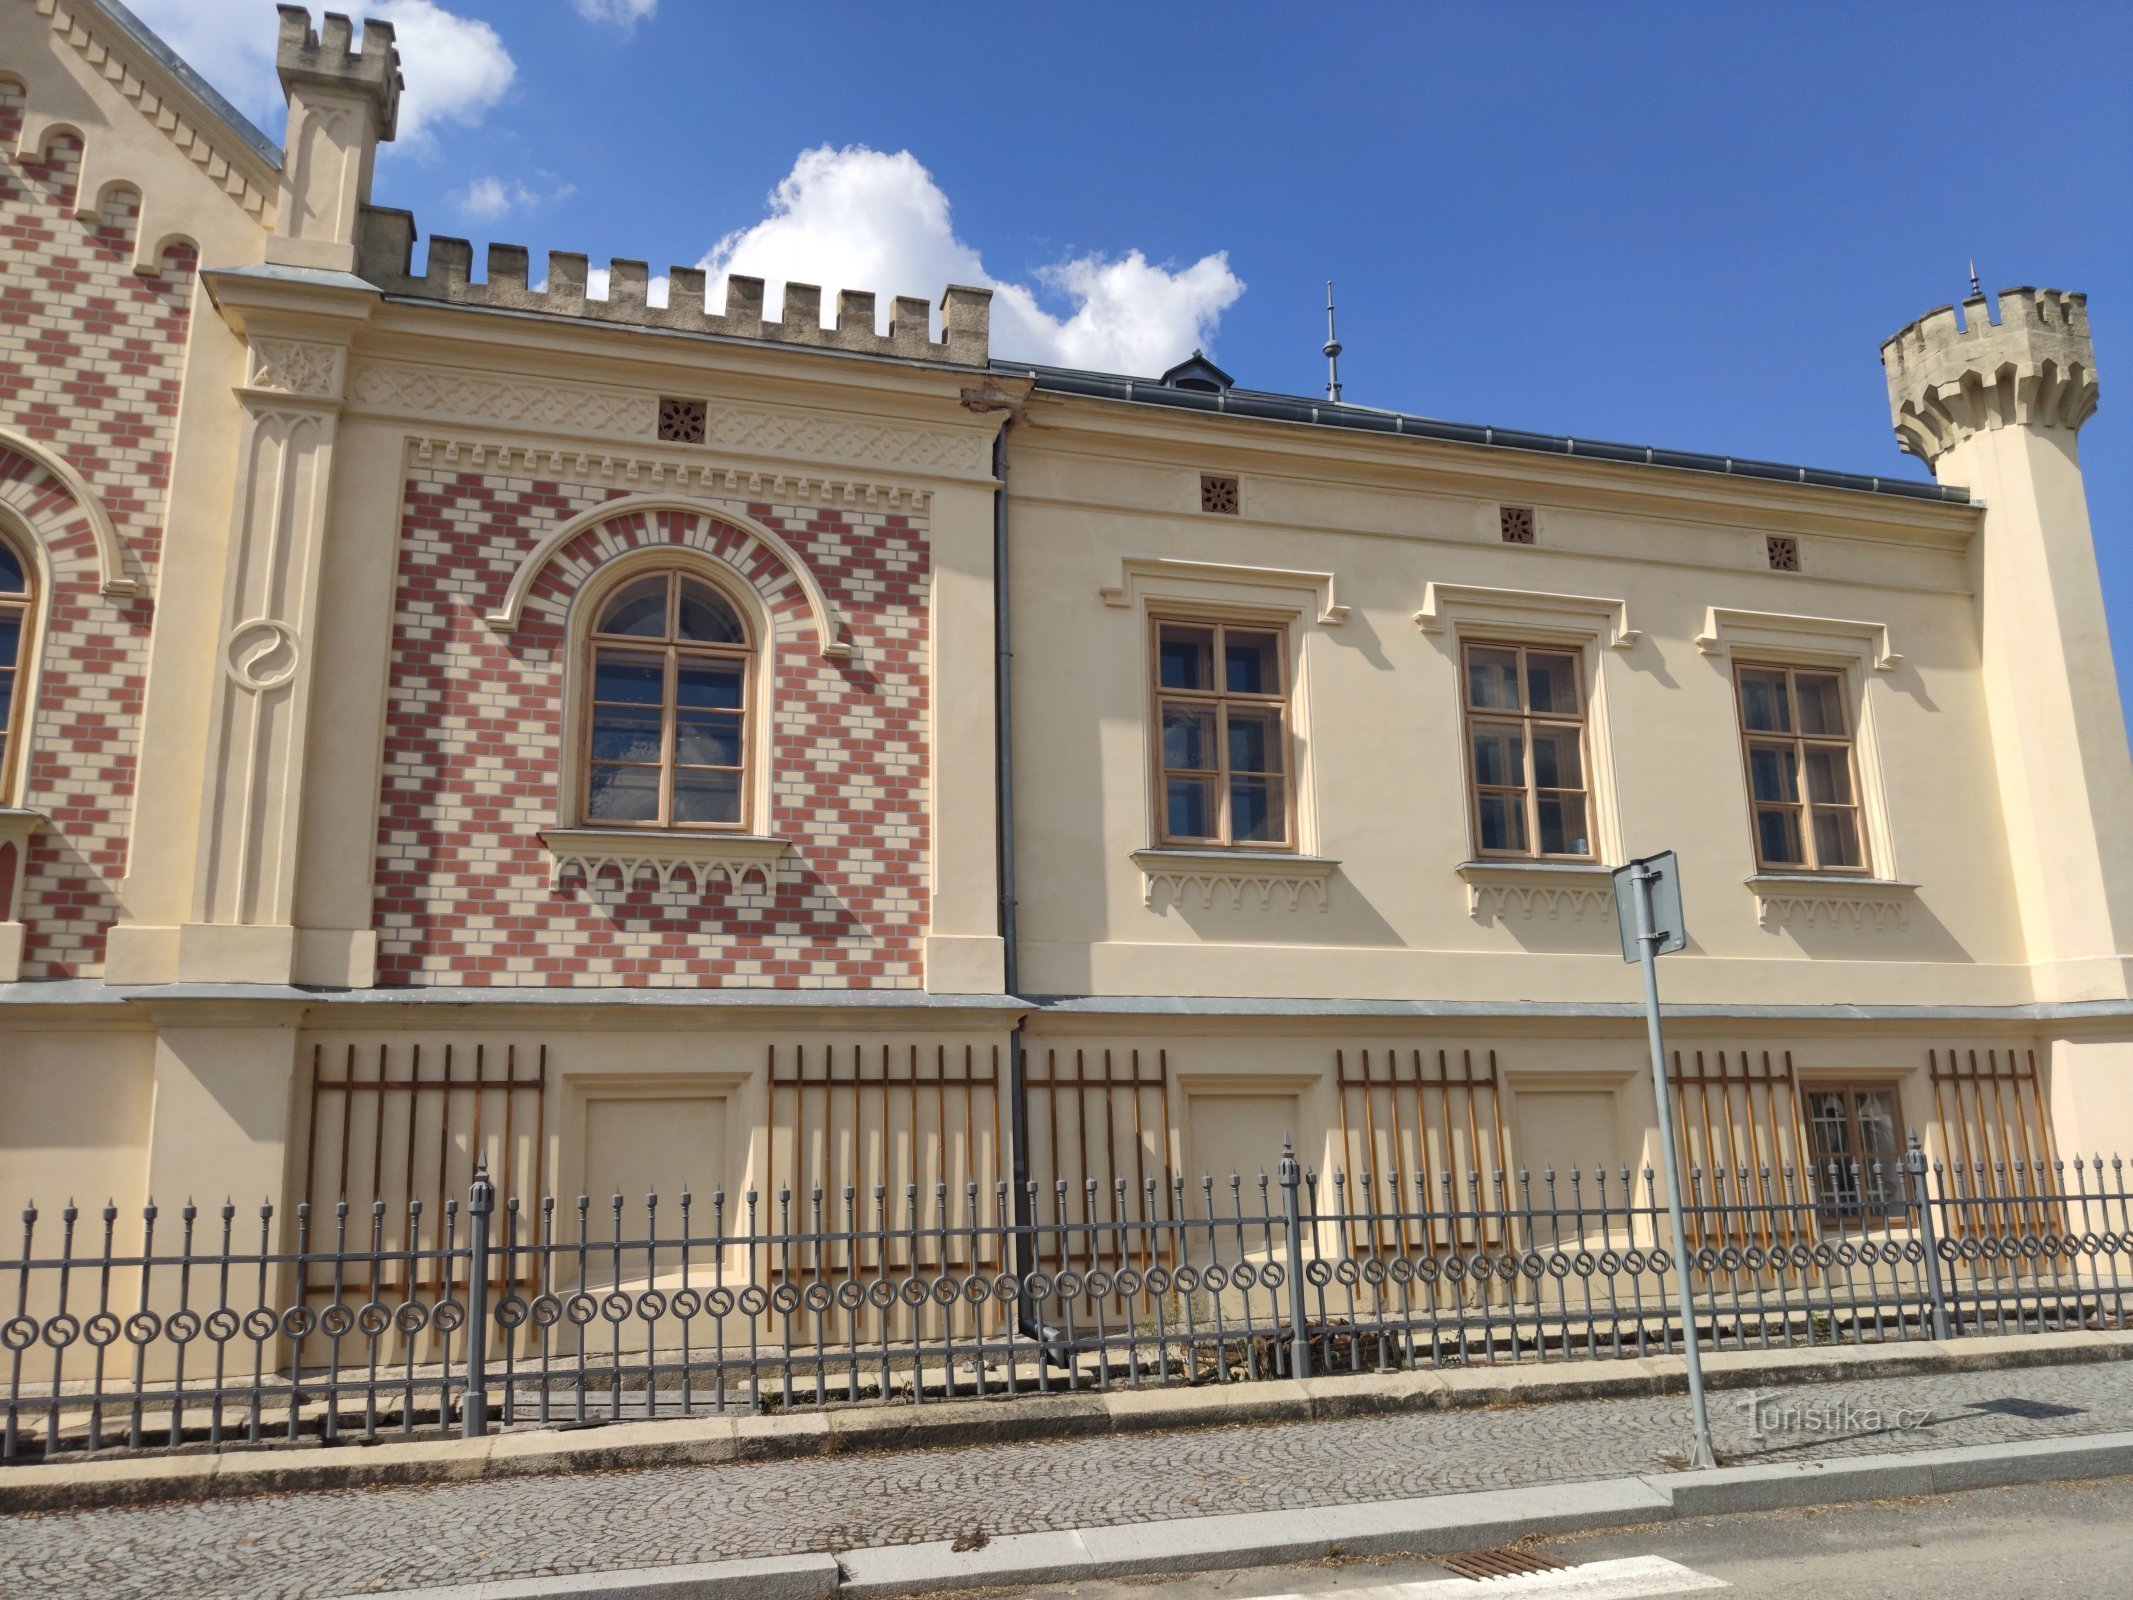 repaired facade of the castle August 2020